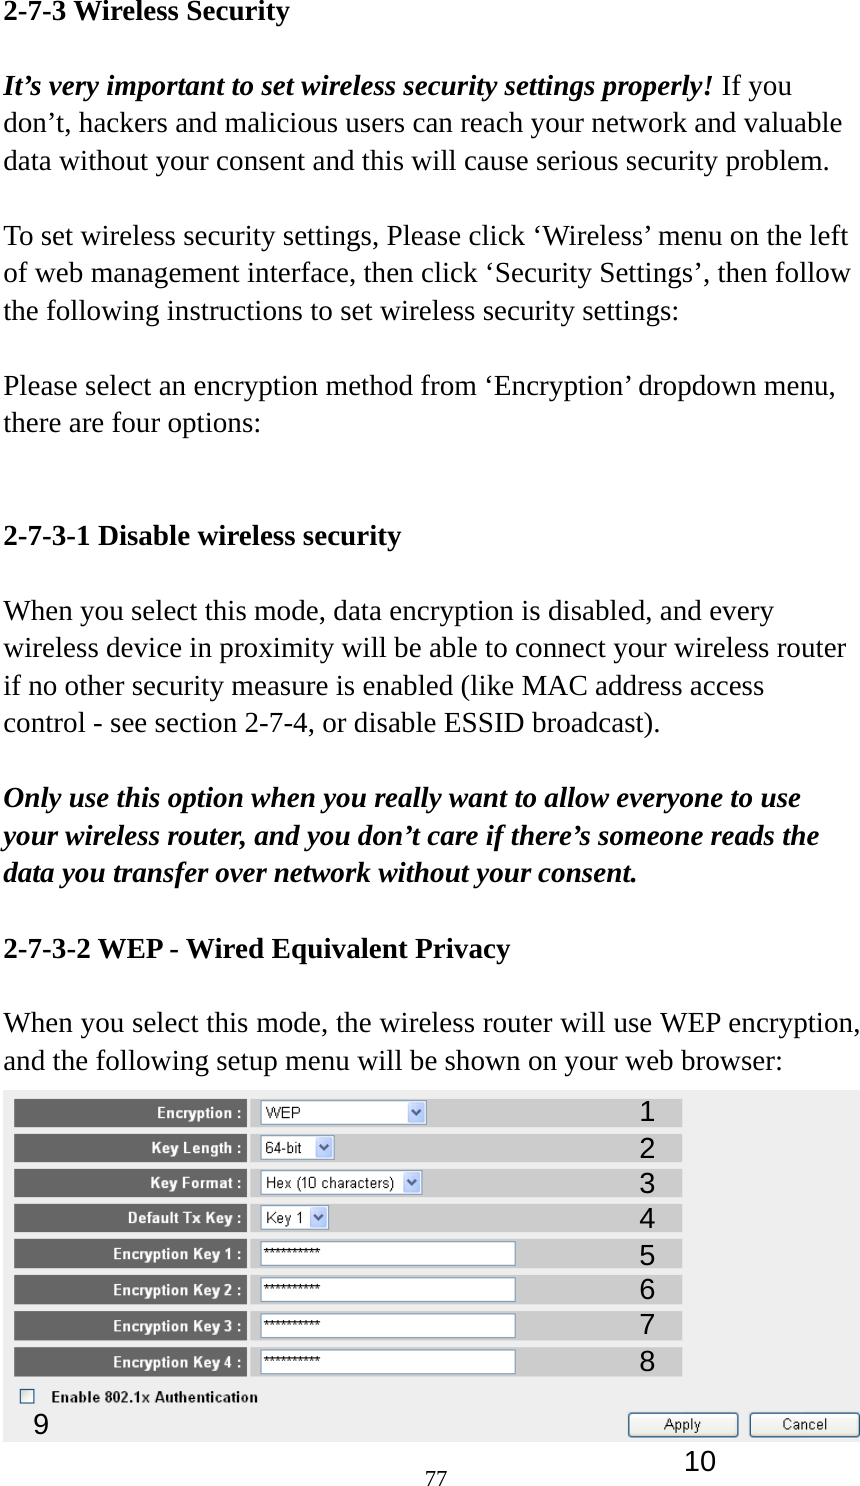 77 2-7-3 Wireless Security  It’s very important to set wireless security settings properly! If you don’t, hackers and malicious users can reach your network and valuable data without your consent and this will cause serious security problem.  To set wireless security settings, Please click ‘Wireless’ menu on the left of web management interface, then click ‘Security Settings’, then follow the following instructions to set wireless security settings:  Please select an encryption method from ‘Encryption’ dropdown menu, there are four options:   2-7-3-1 Disable wireless security  When you select this mode, data encryption is disabled, and every wireless device in proximity will be able to connect your wireless router if no other security measure is enabled (like MAC address access control - see section 2-7-4, or disable ESSID broadcast).    Only use this option when you really want to allow everyone to use your wireless router, and you don’t care if there’s someone reads the data you transfer over network without your consent.  2-7-3-2 WEP - Wired Equivalent Privacy  When you select this mode, the wireless router will use WEP encryption, and the following setup menu will be shown on your web browser:  123 5 7 6 9 4 8 10 